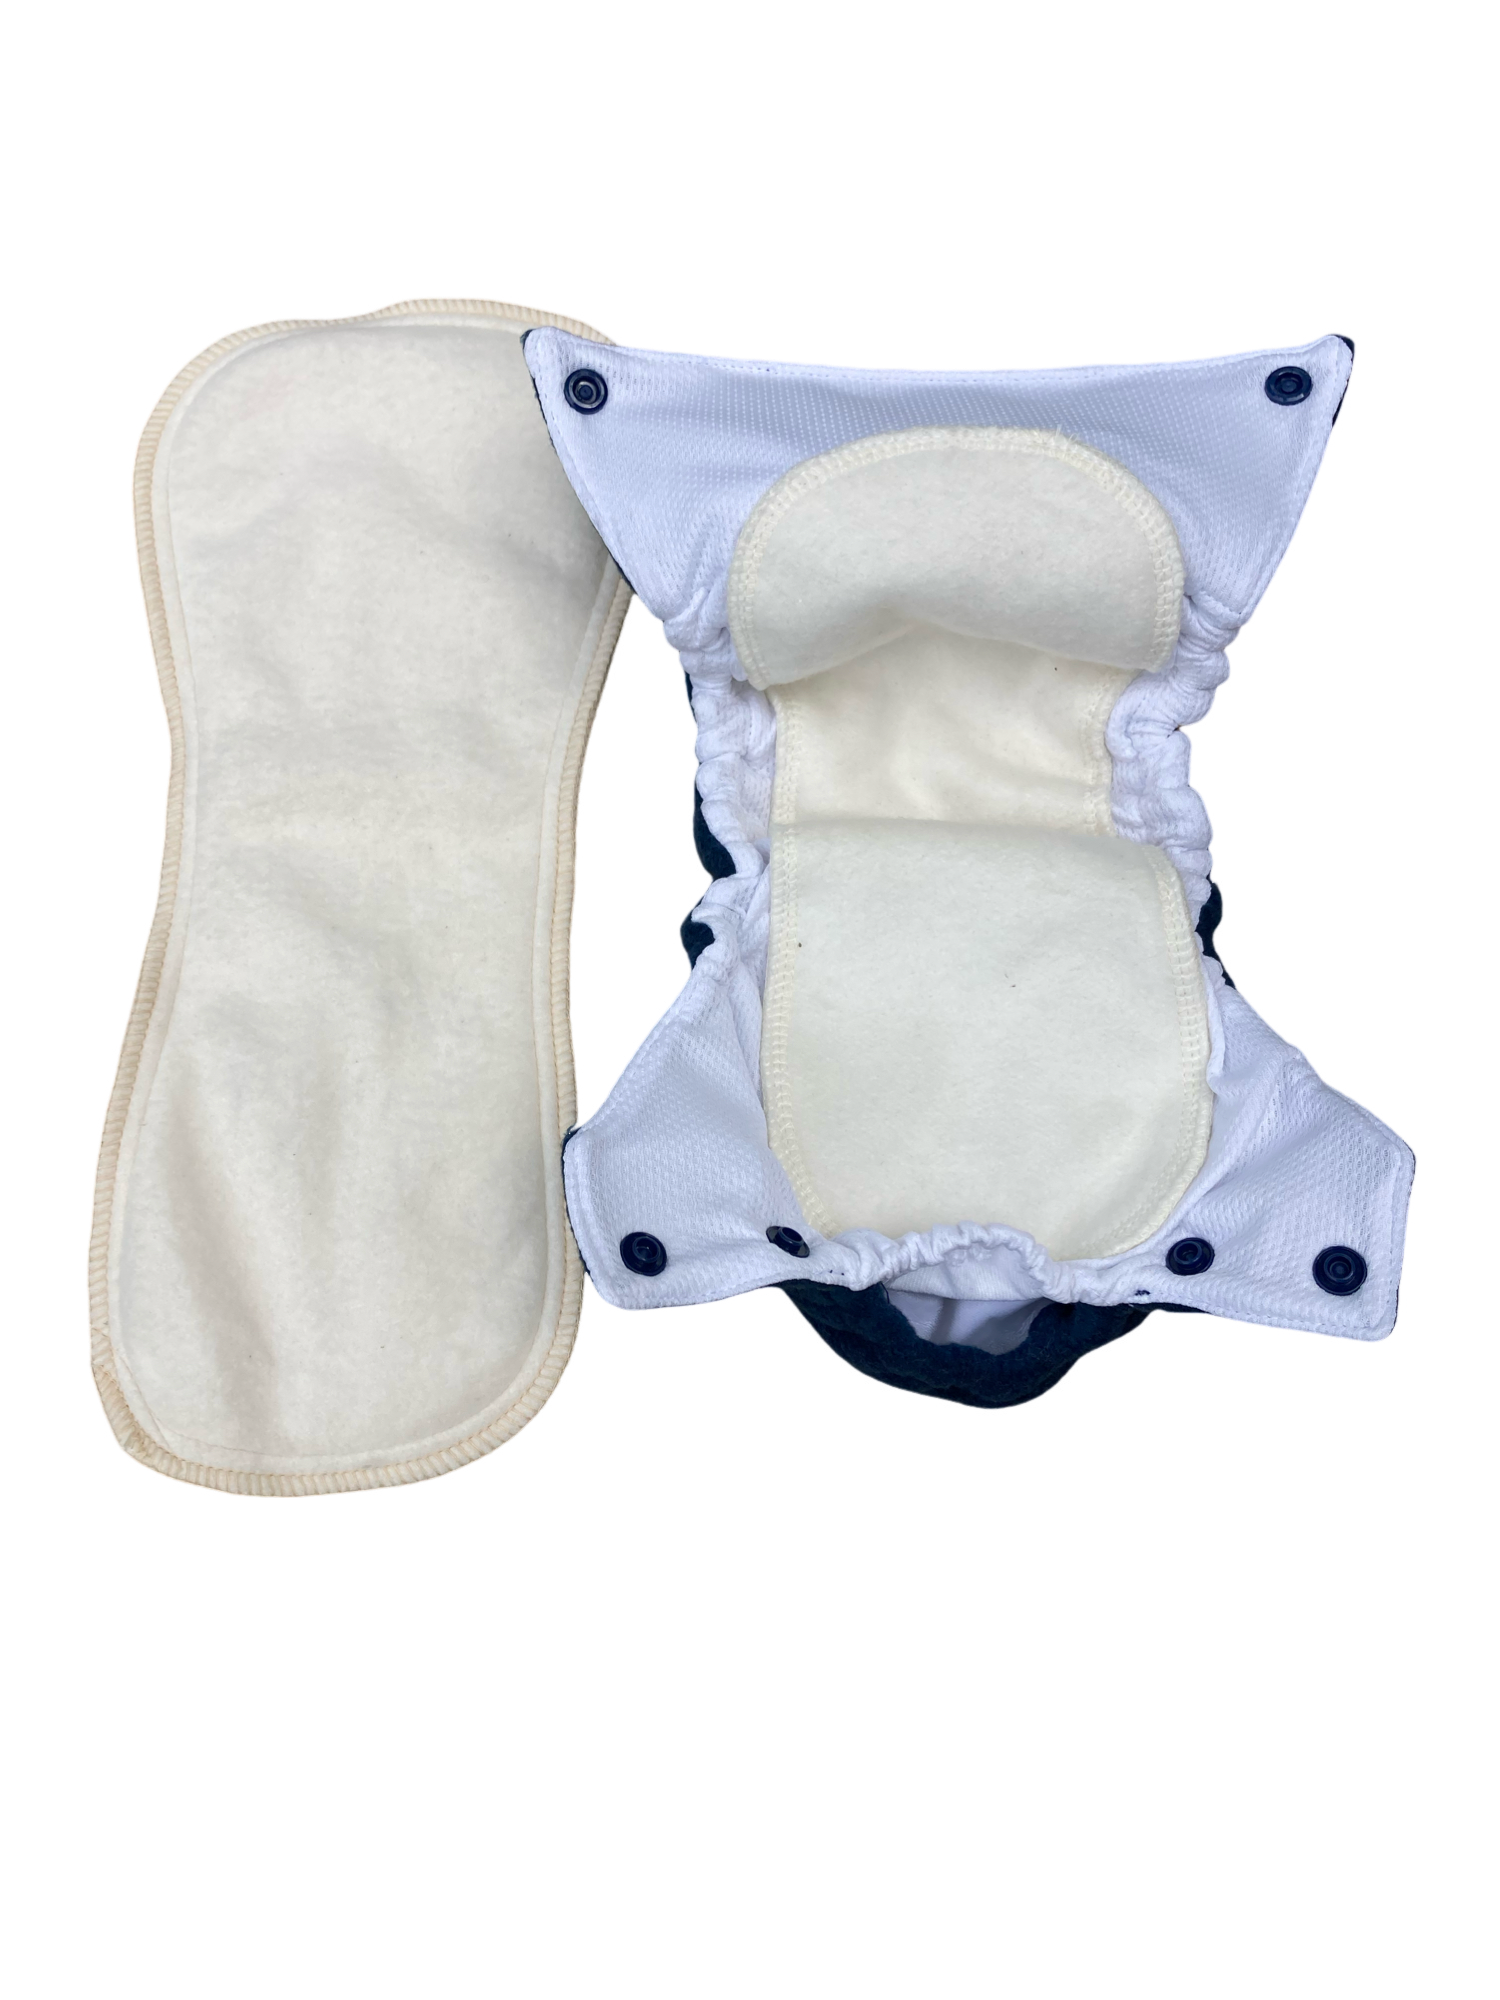 Flappy-Nappy Pocket Diaper 3-Pack